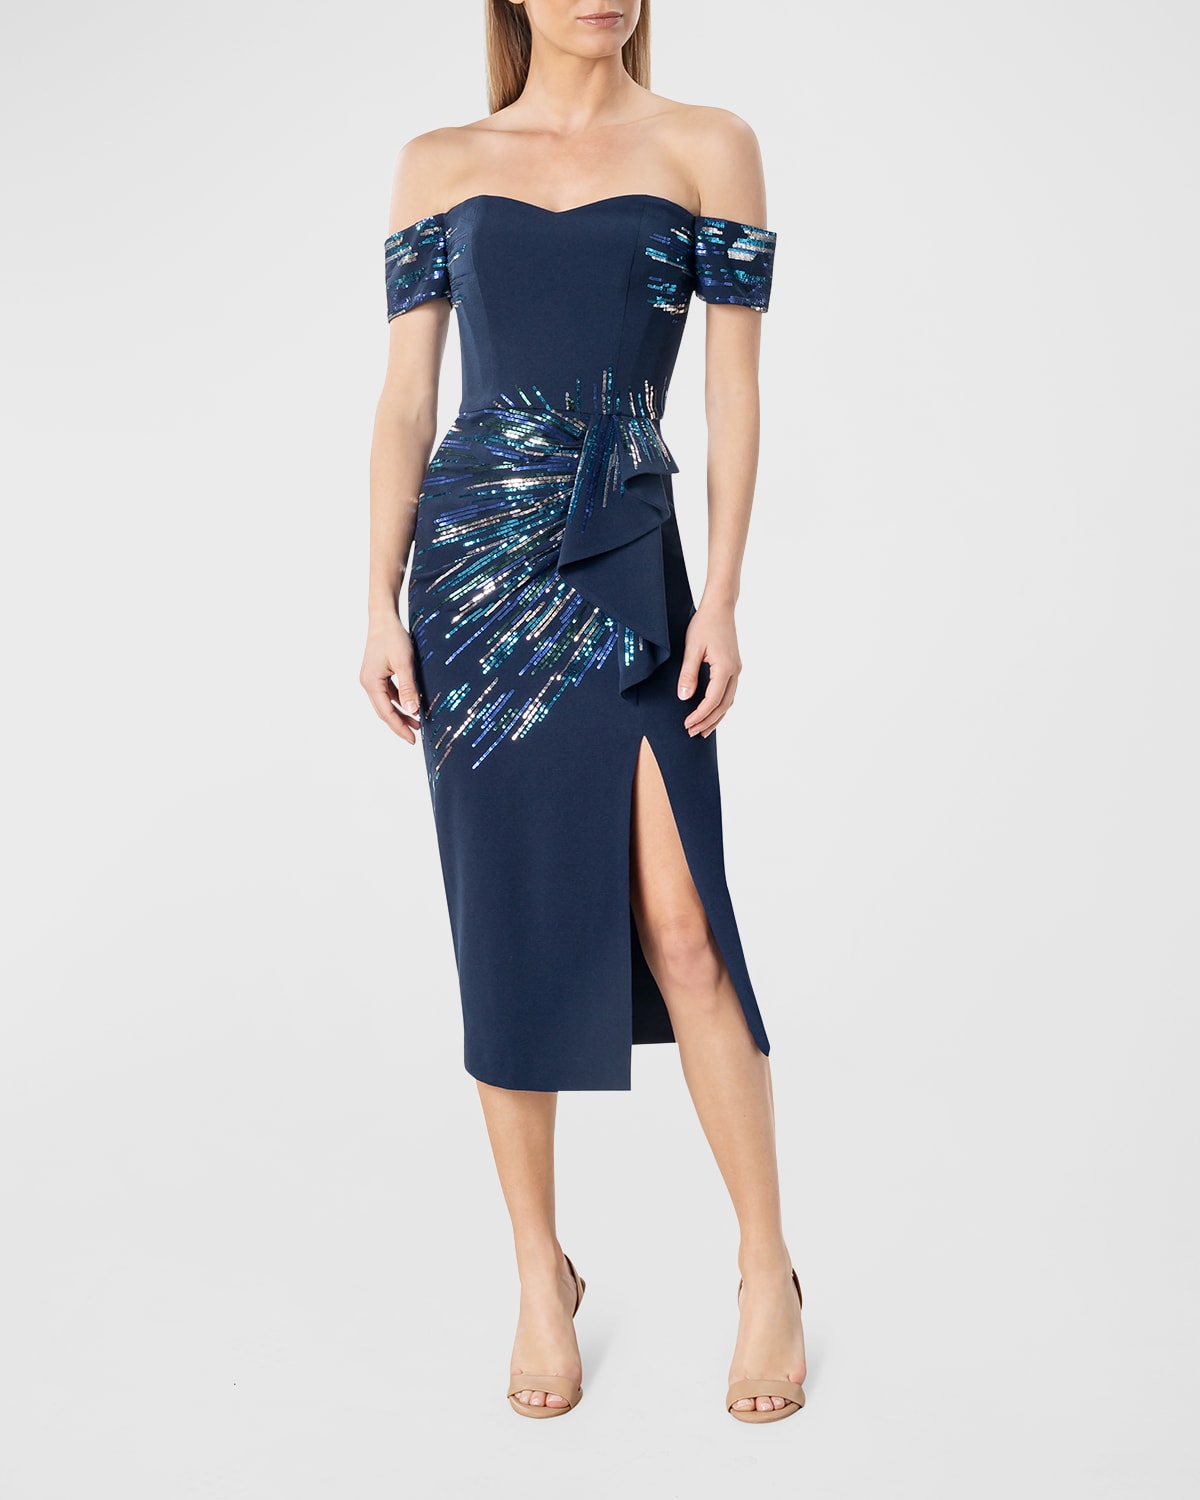 Dress The Population Alani Off-the-shoulder Sequin Midi Dress In Navy Multi